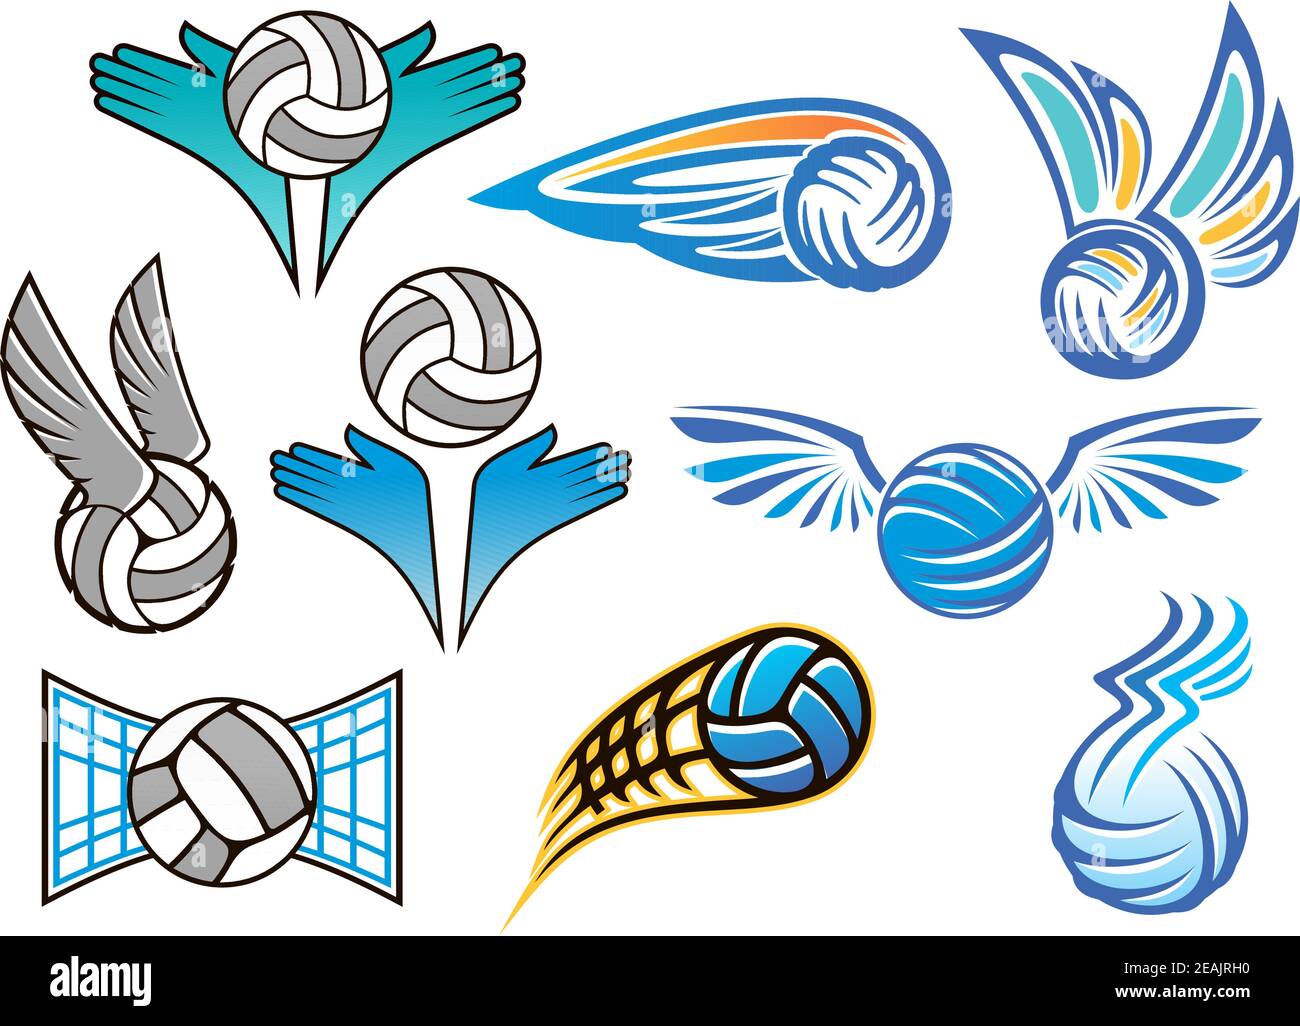 Volleyball Tattoo Design Images (Volleyball Ink Design Ideas) | Volleyball  tattoos, Tattoos, Tattoo designs